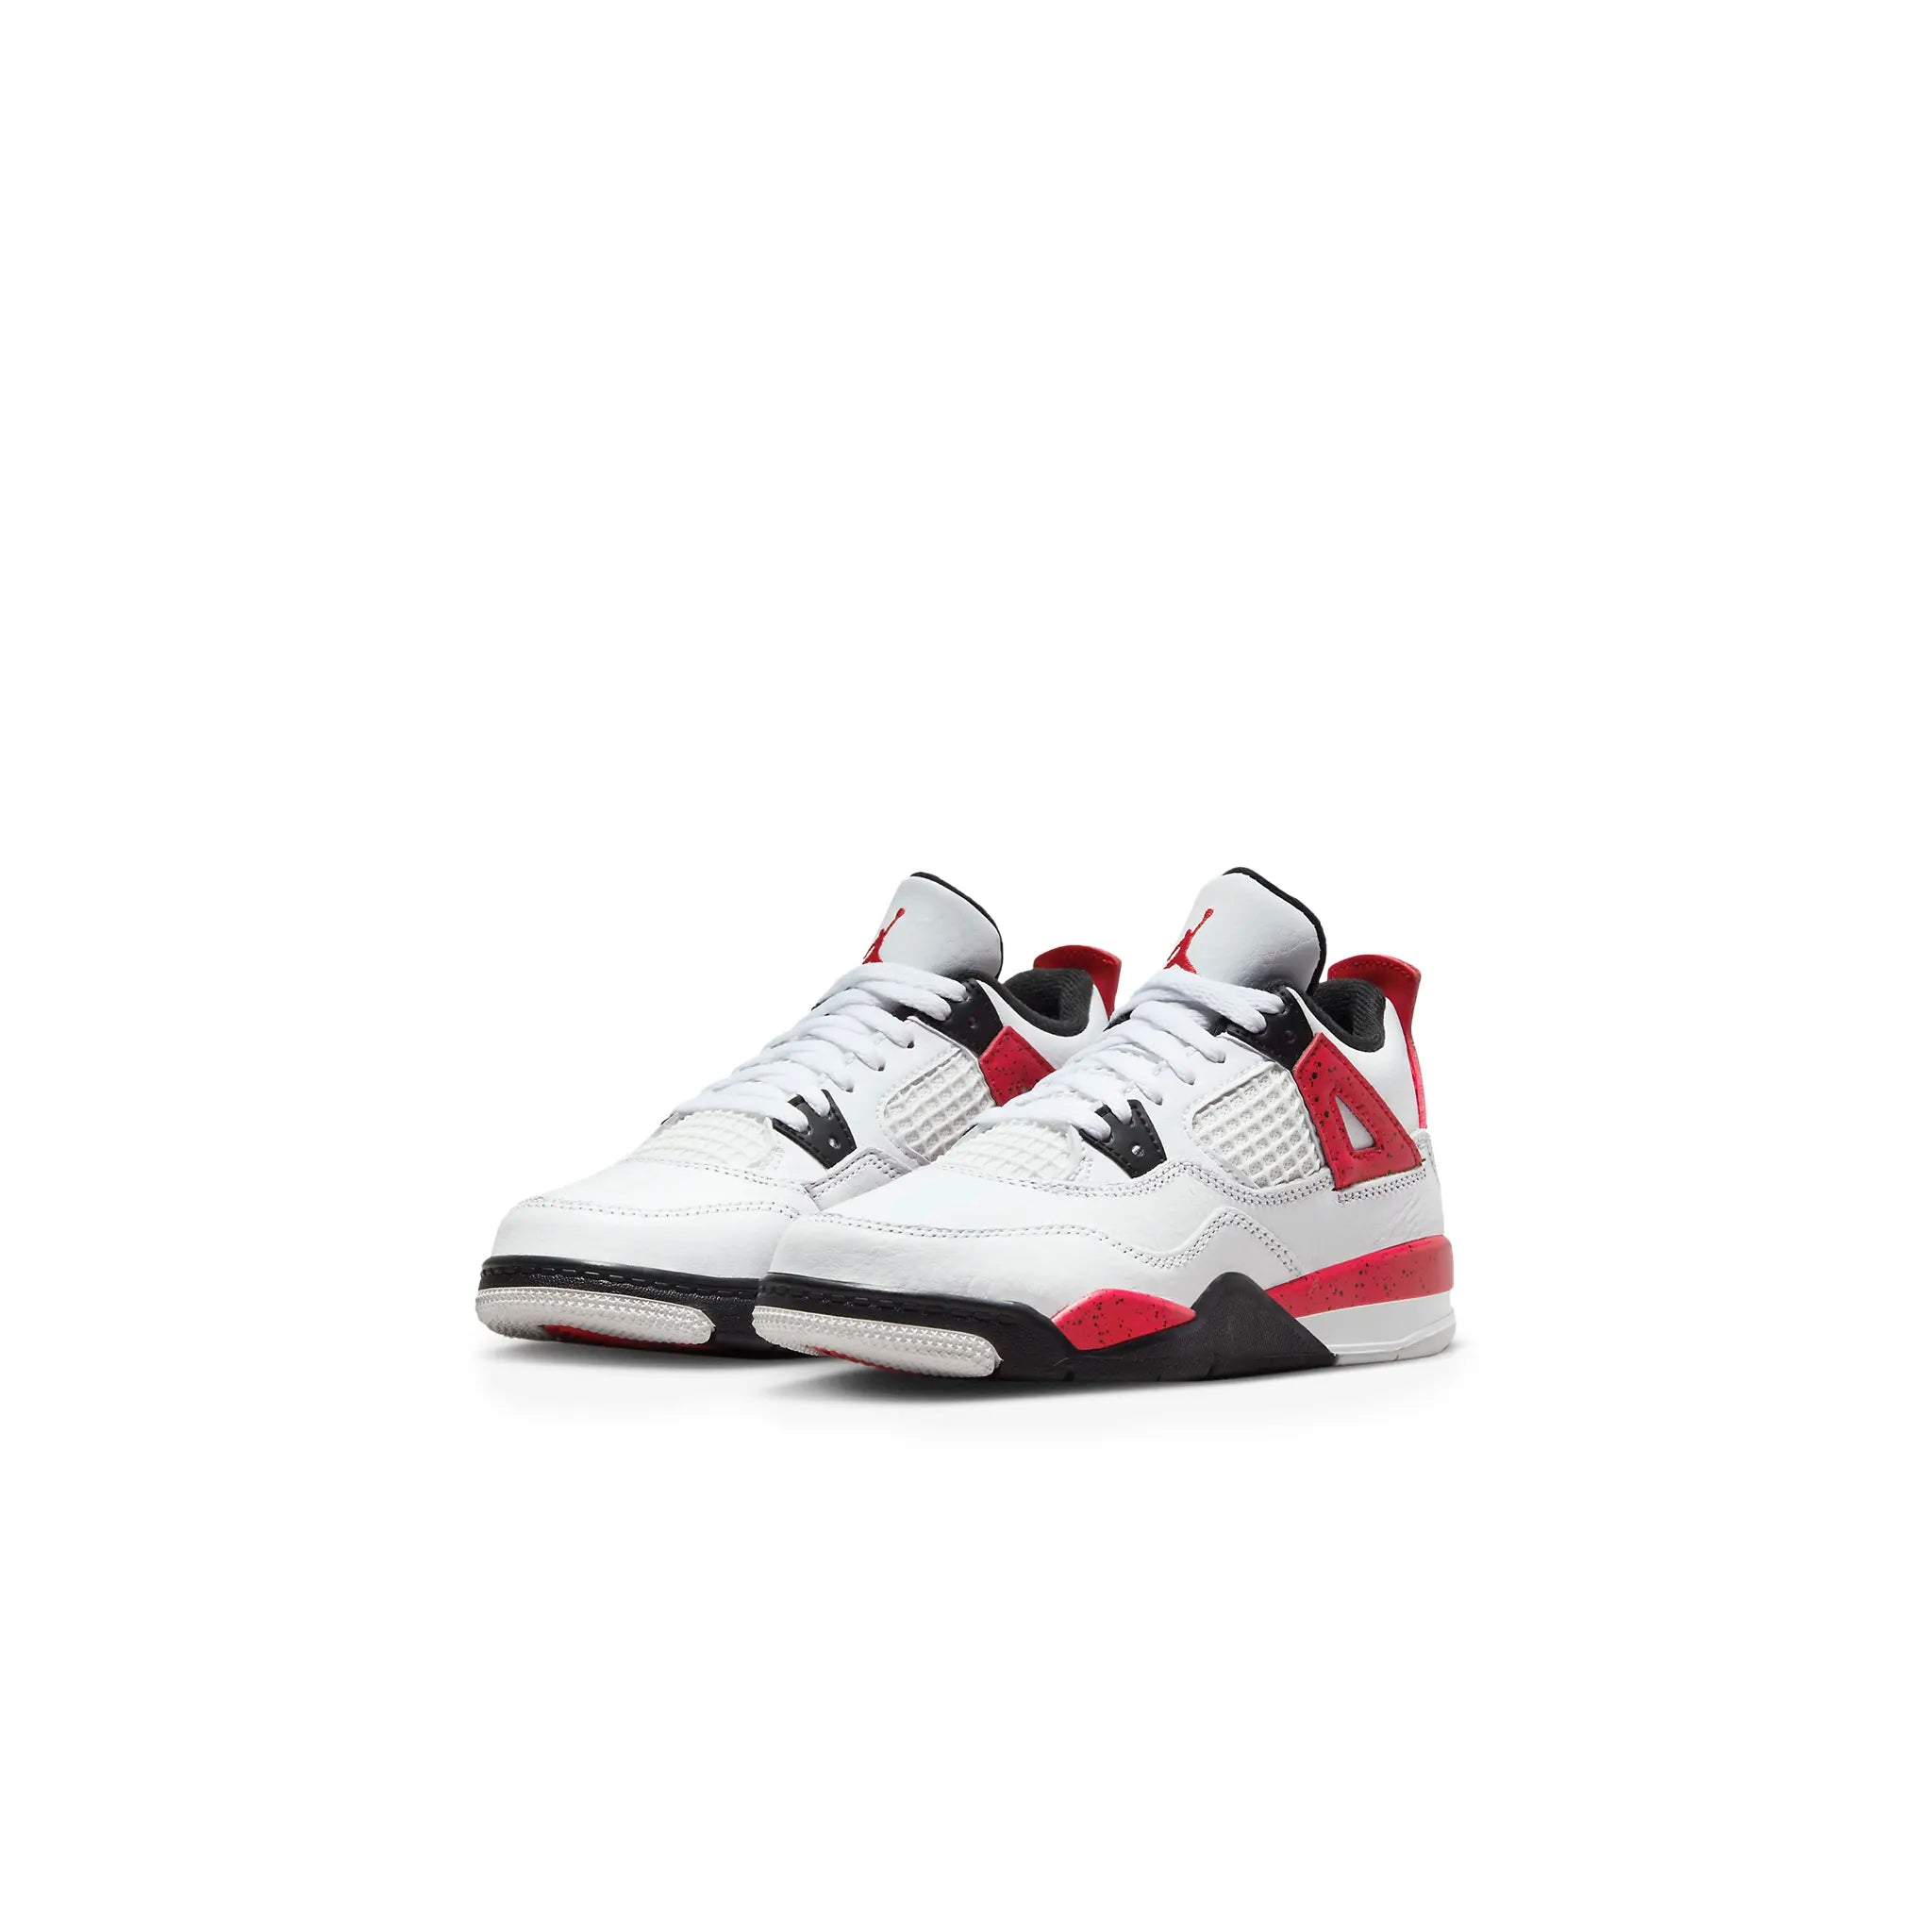 Front side view of Air Jordan 4 Retro Red Cement (PS) BQ7669-161